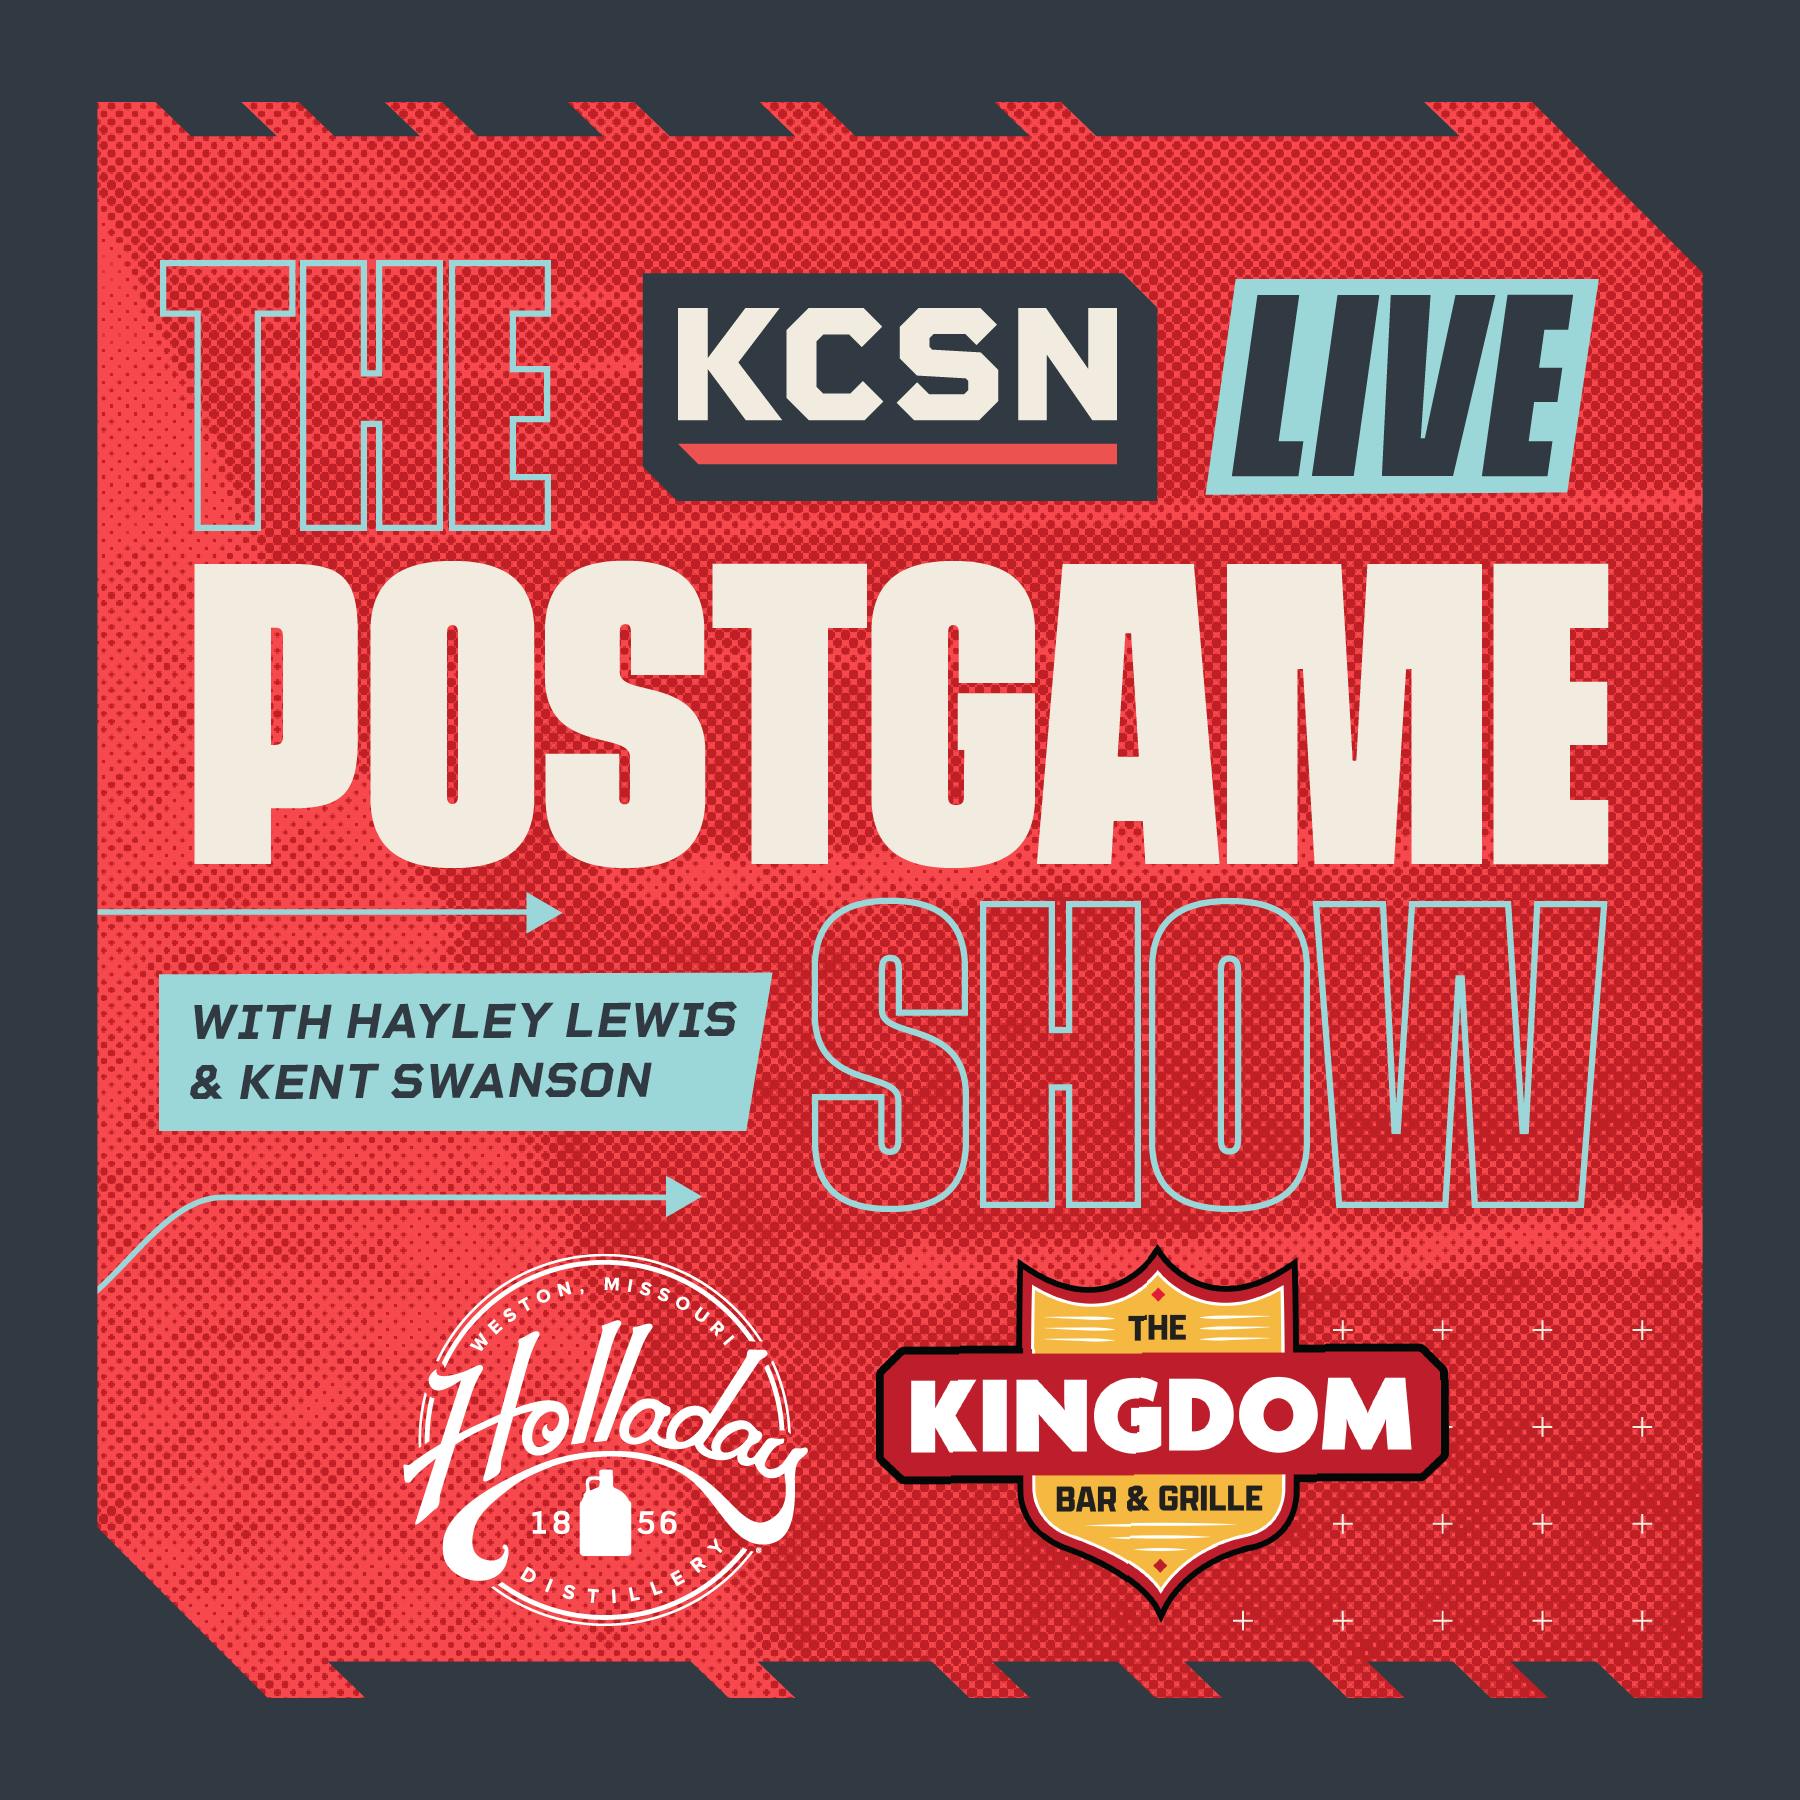 KCSN Postgame Show 8/26: Chiefs Claim 33-32 Comeback Victory Over Browns in Final Preseason Game